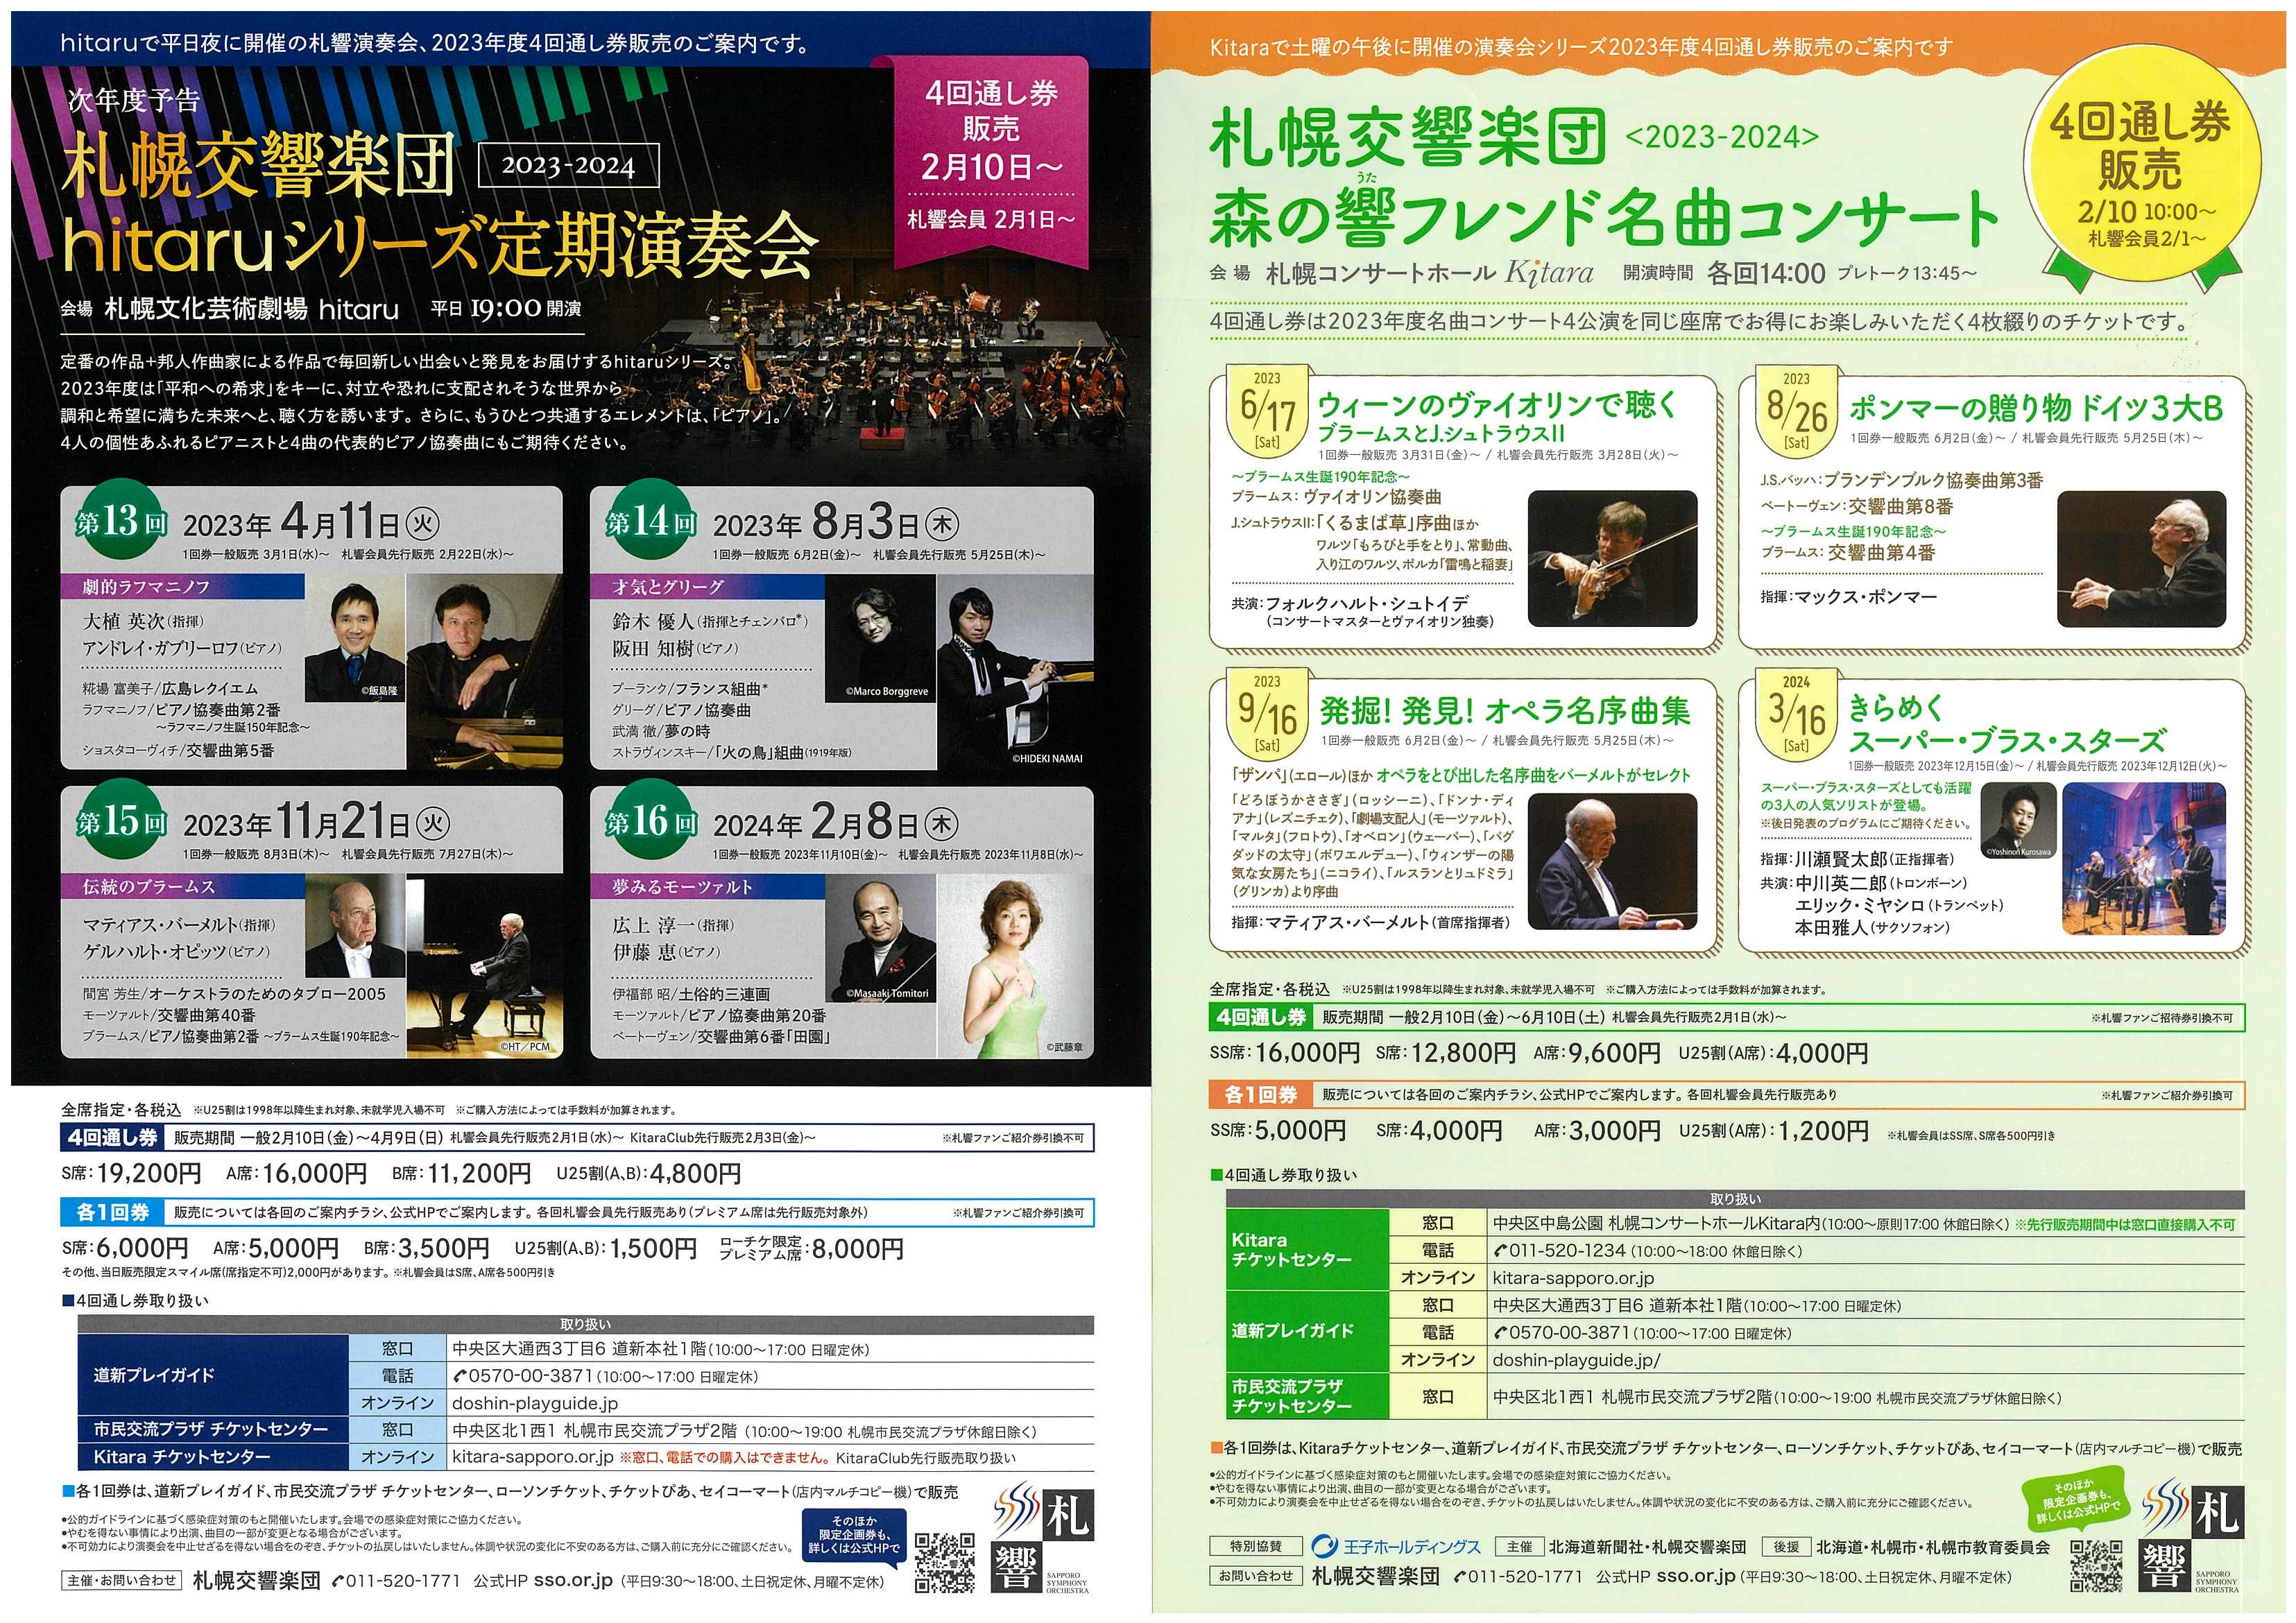 【2023-2024】Sapporo Symphony Orchestra sponsored concerts